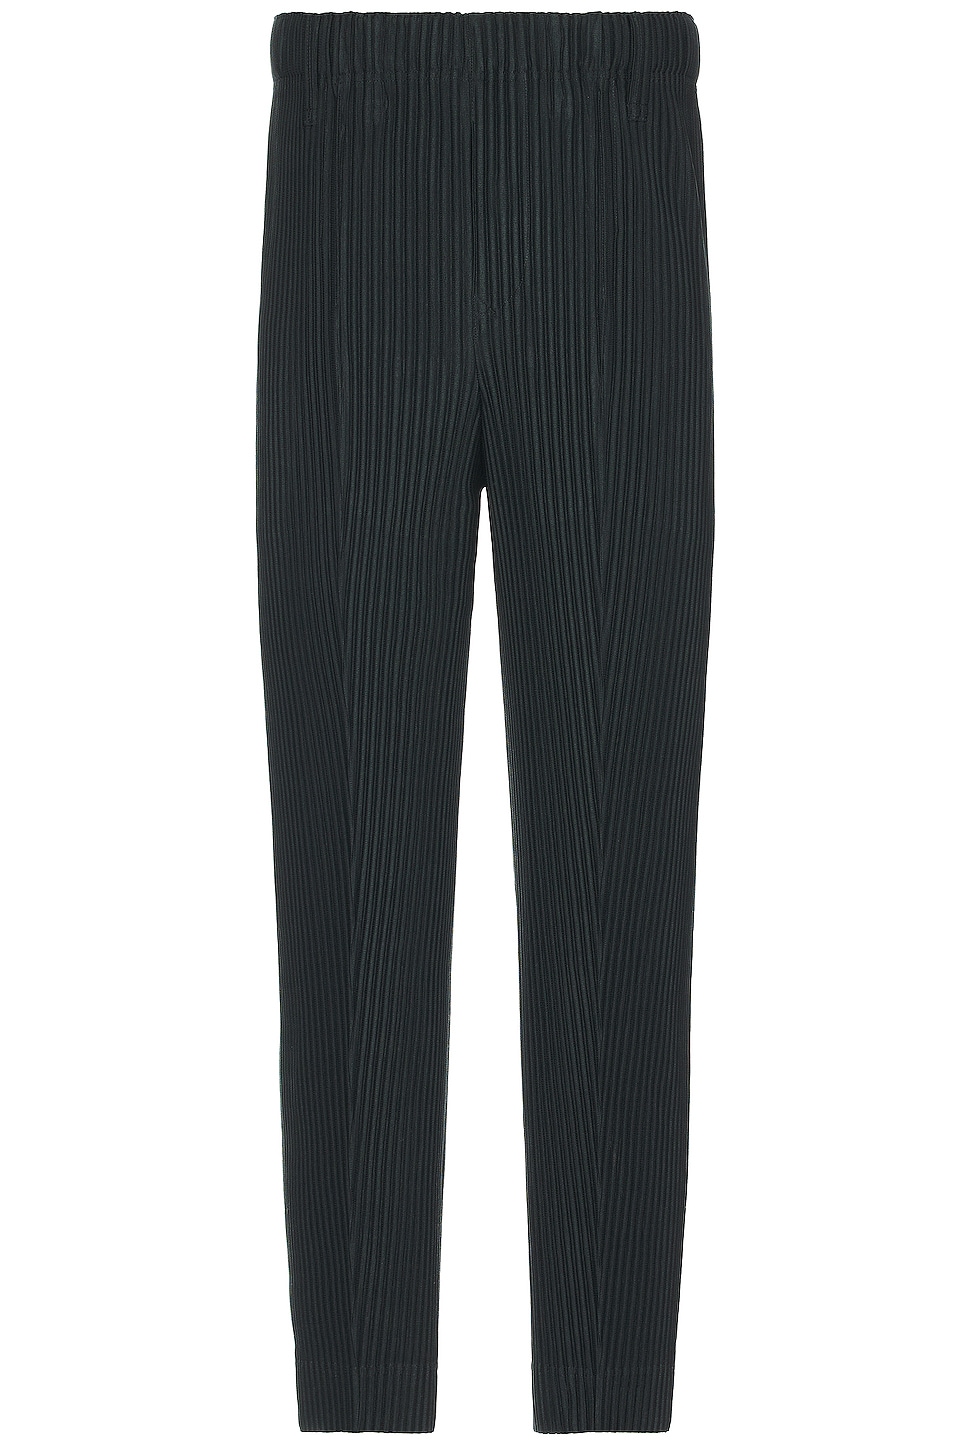 Image 1 of Homme Plisse Issey Miyake Compleat Trousers in Dark Green